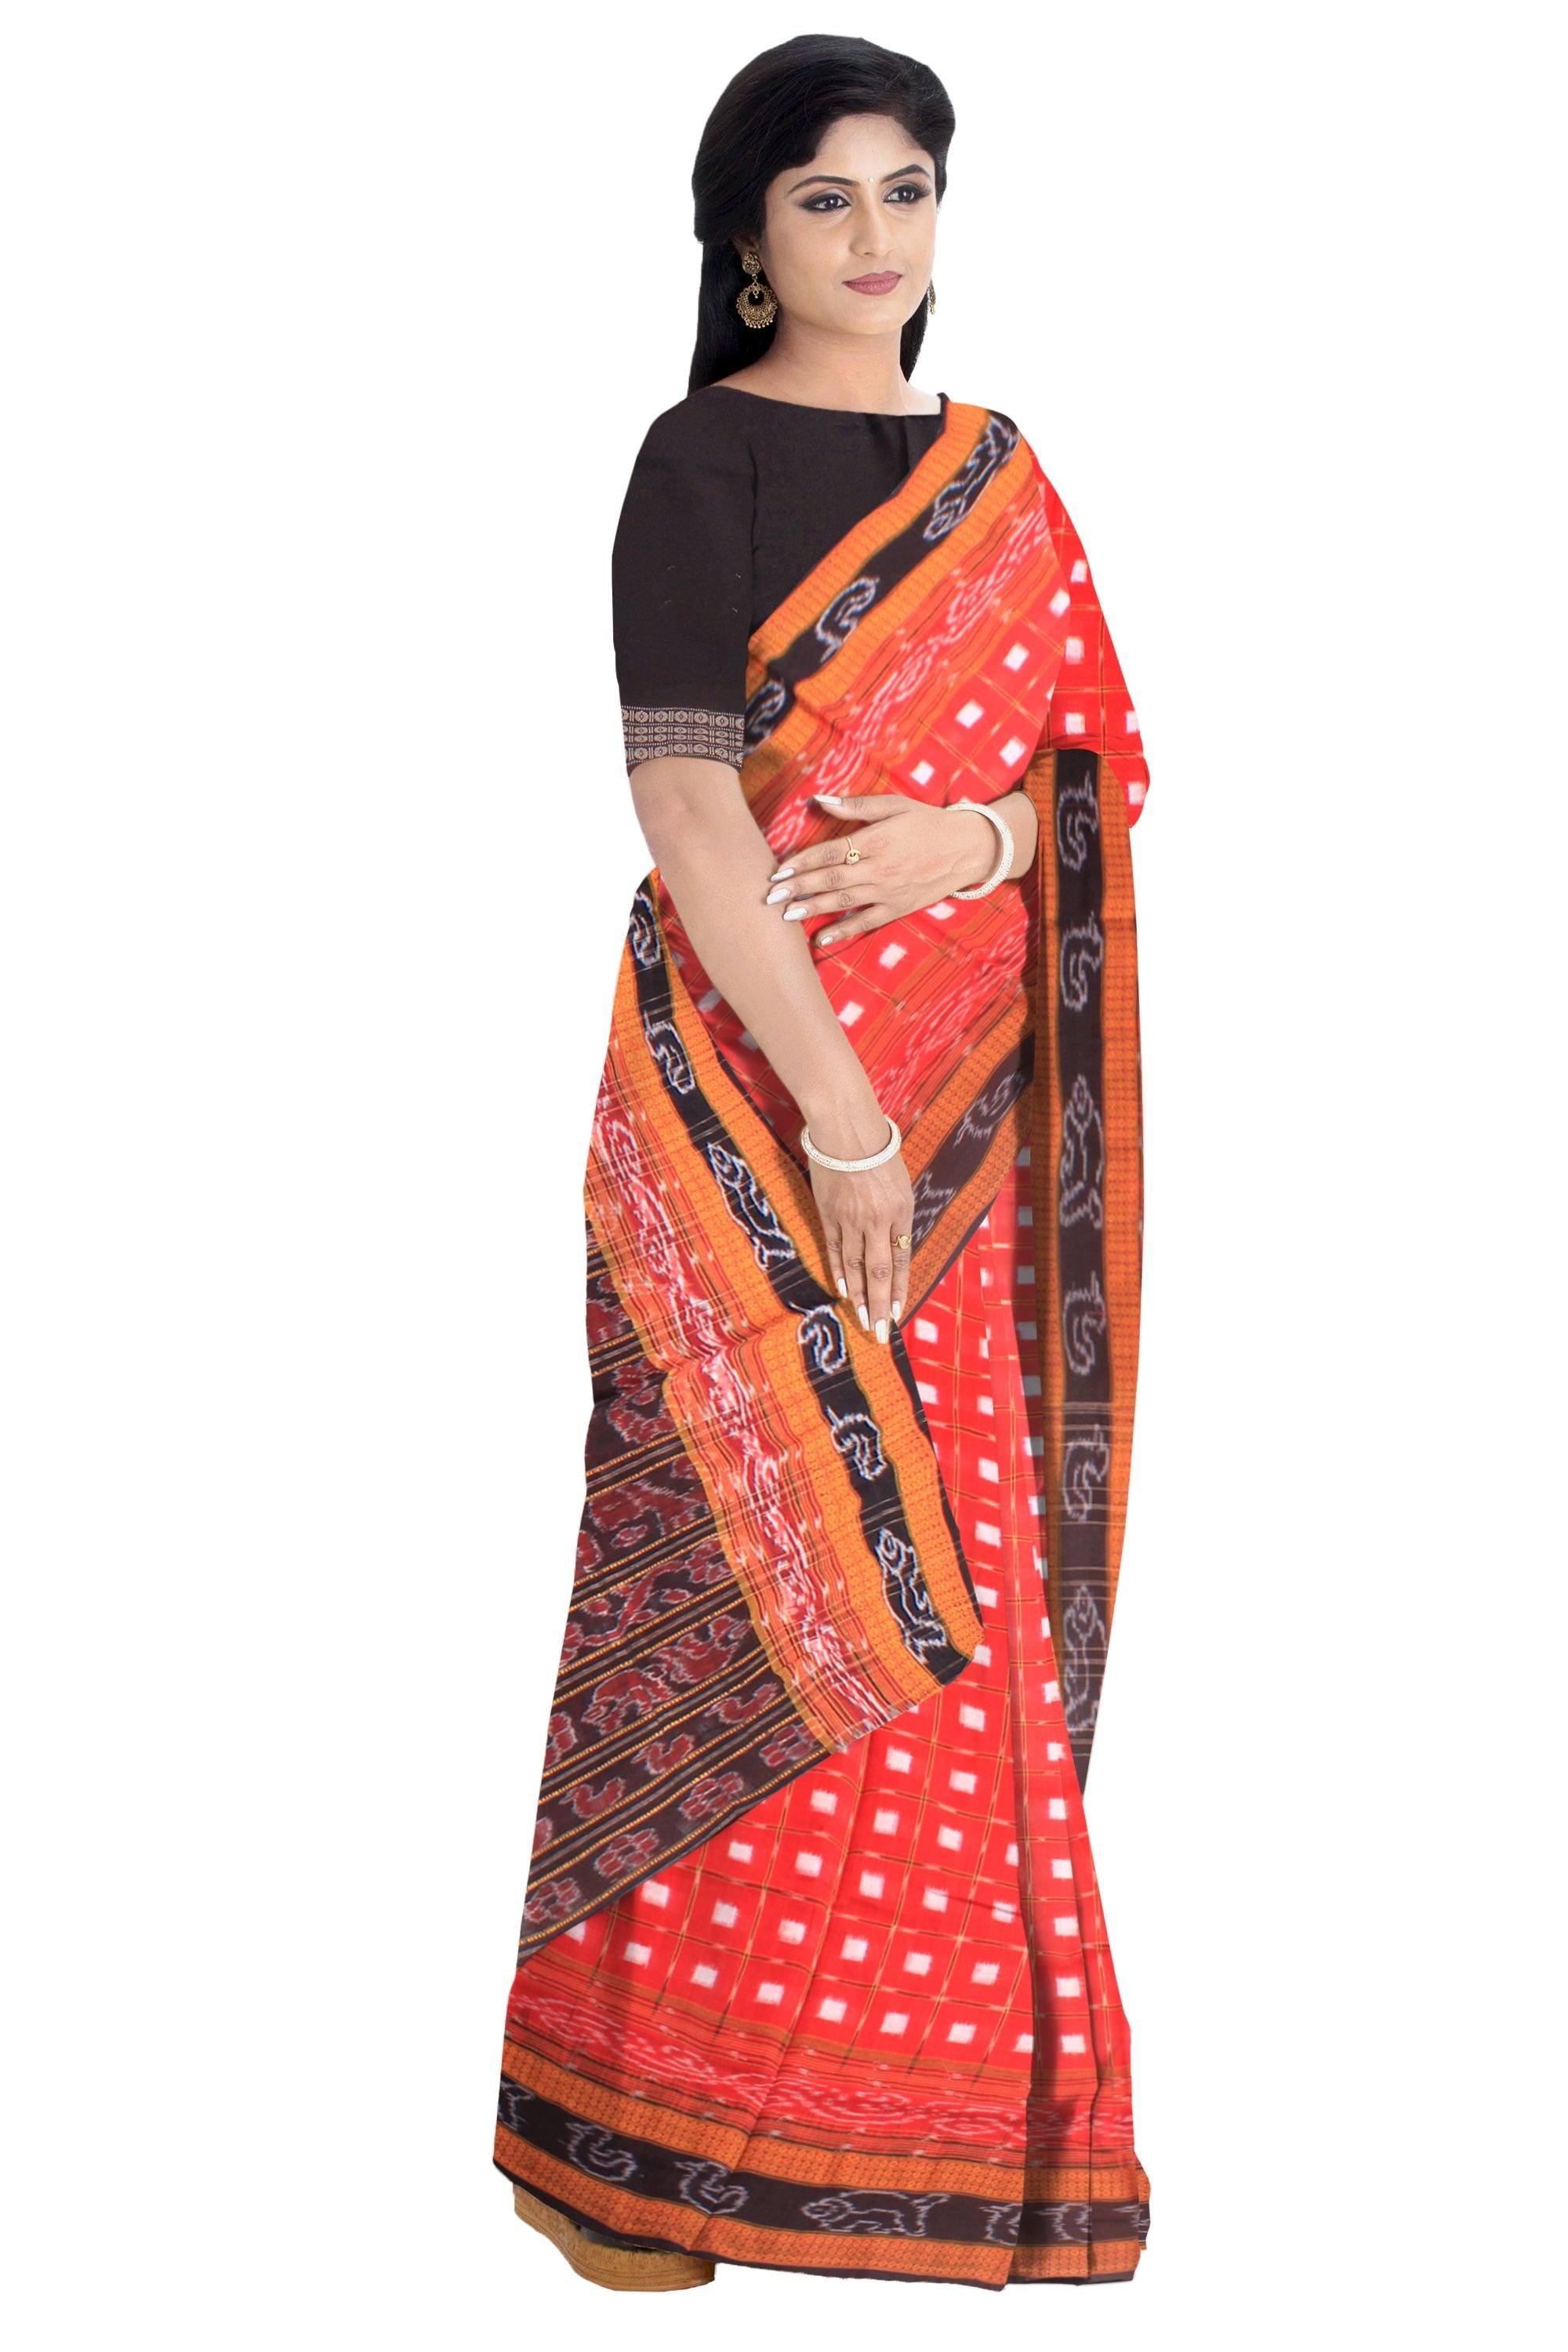 Lattest design Red and White color Cotton saree with lining with blouse piece. - Koshali Arts & Crafts Enterprise